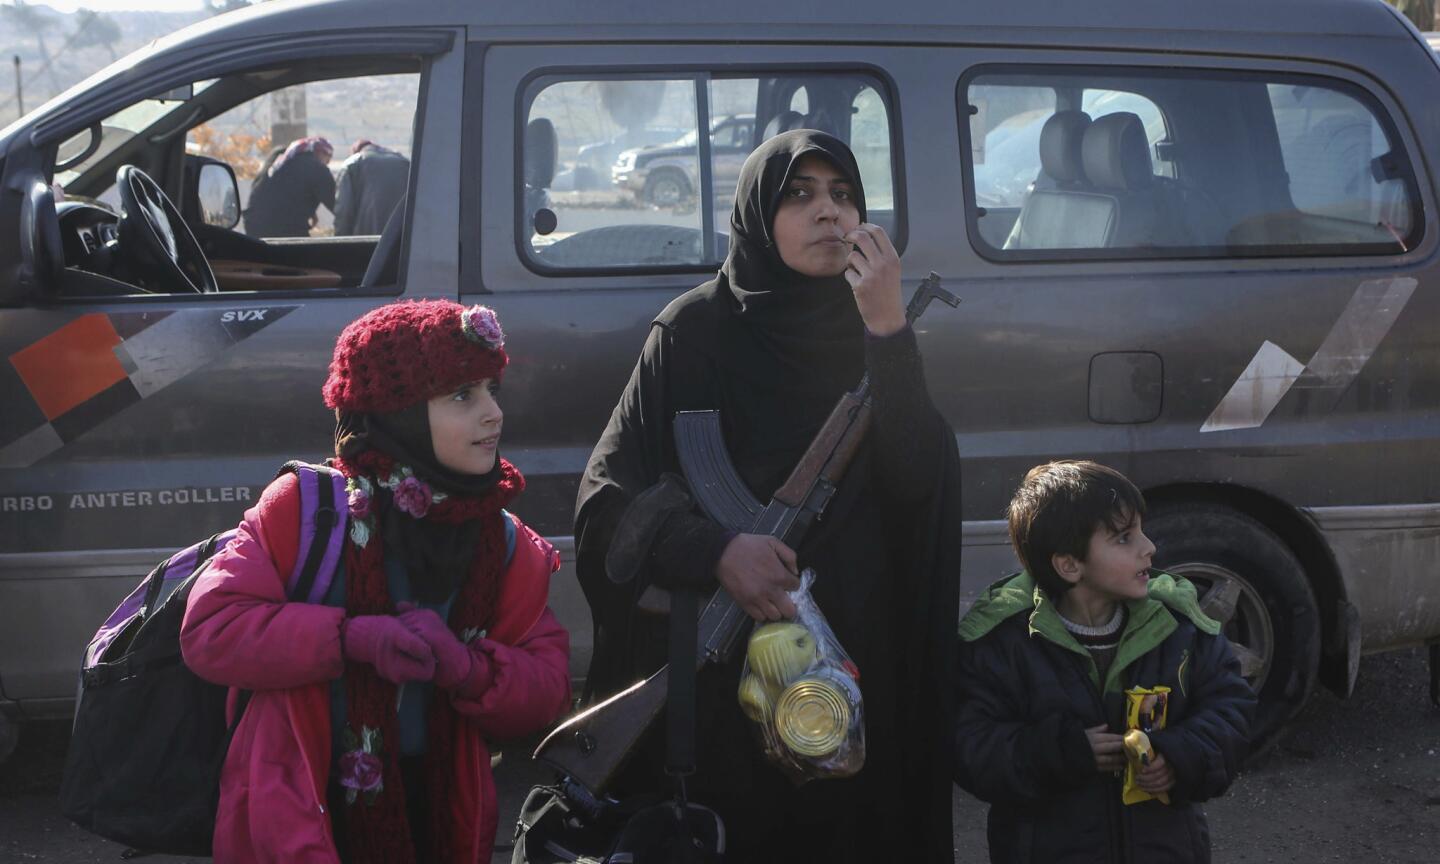 Syrians evacuated from the embattled Syrian city of Aleppo during the ceasefire arrive at a refugee camp in Rashidin, near Idlib, Syria, on Dec. 20, 2016. Russian Foreign Minister Sergey Lavrov said on Tuesday that Russia, Iran and Turkey are ready to act as guarantors in a peace deal between the Syrian government and the opposition. He spoke on Tuesday after a meeting of the three countries' foreign ministers in Moscow.